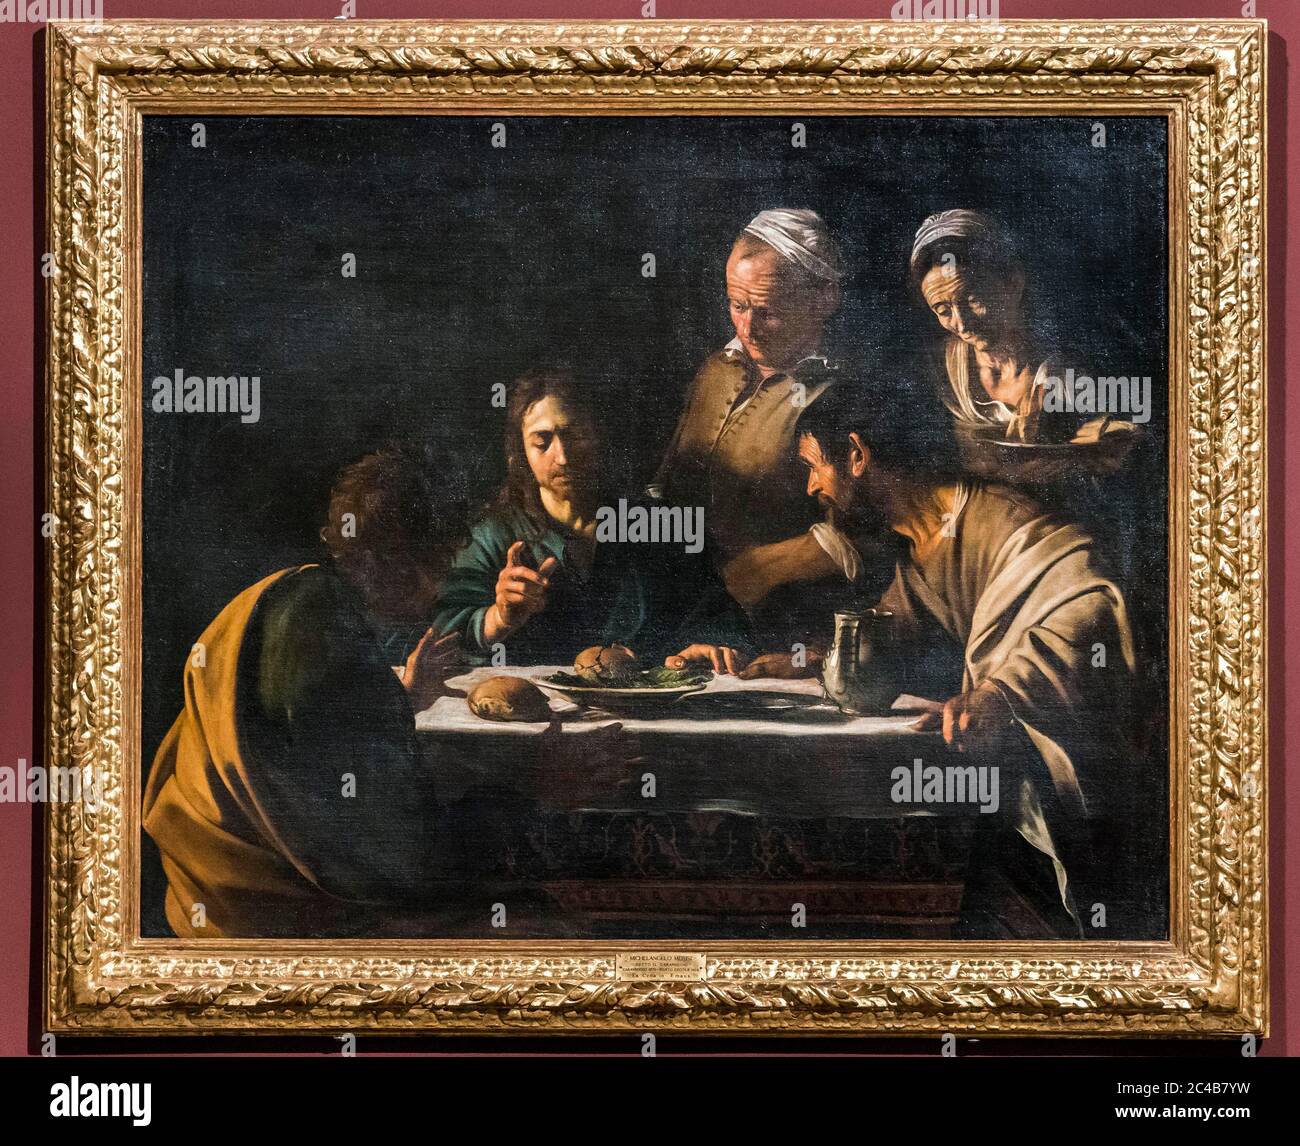 Cena in Emmaus, Evening Painting in Emmaus, painting by Michelangelo Merisi da Caravaggio called Caravaggio, 1571 - 1610, early baroque, Pinacoteca Stock Photo